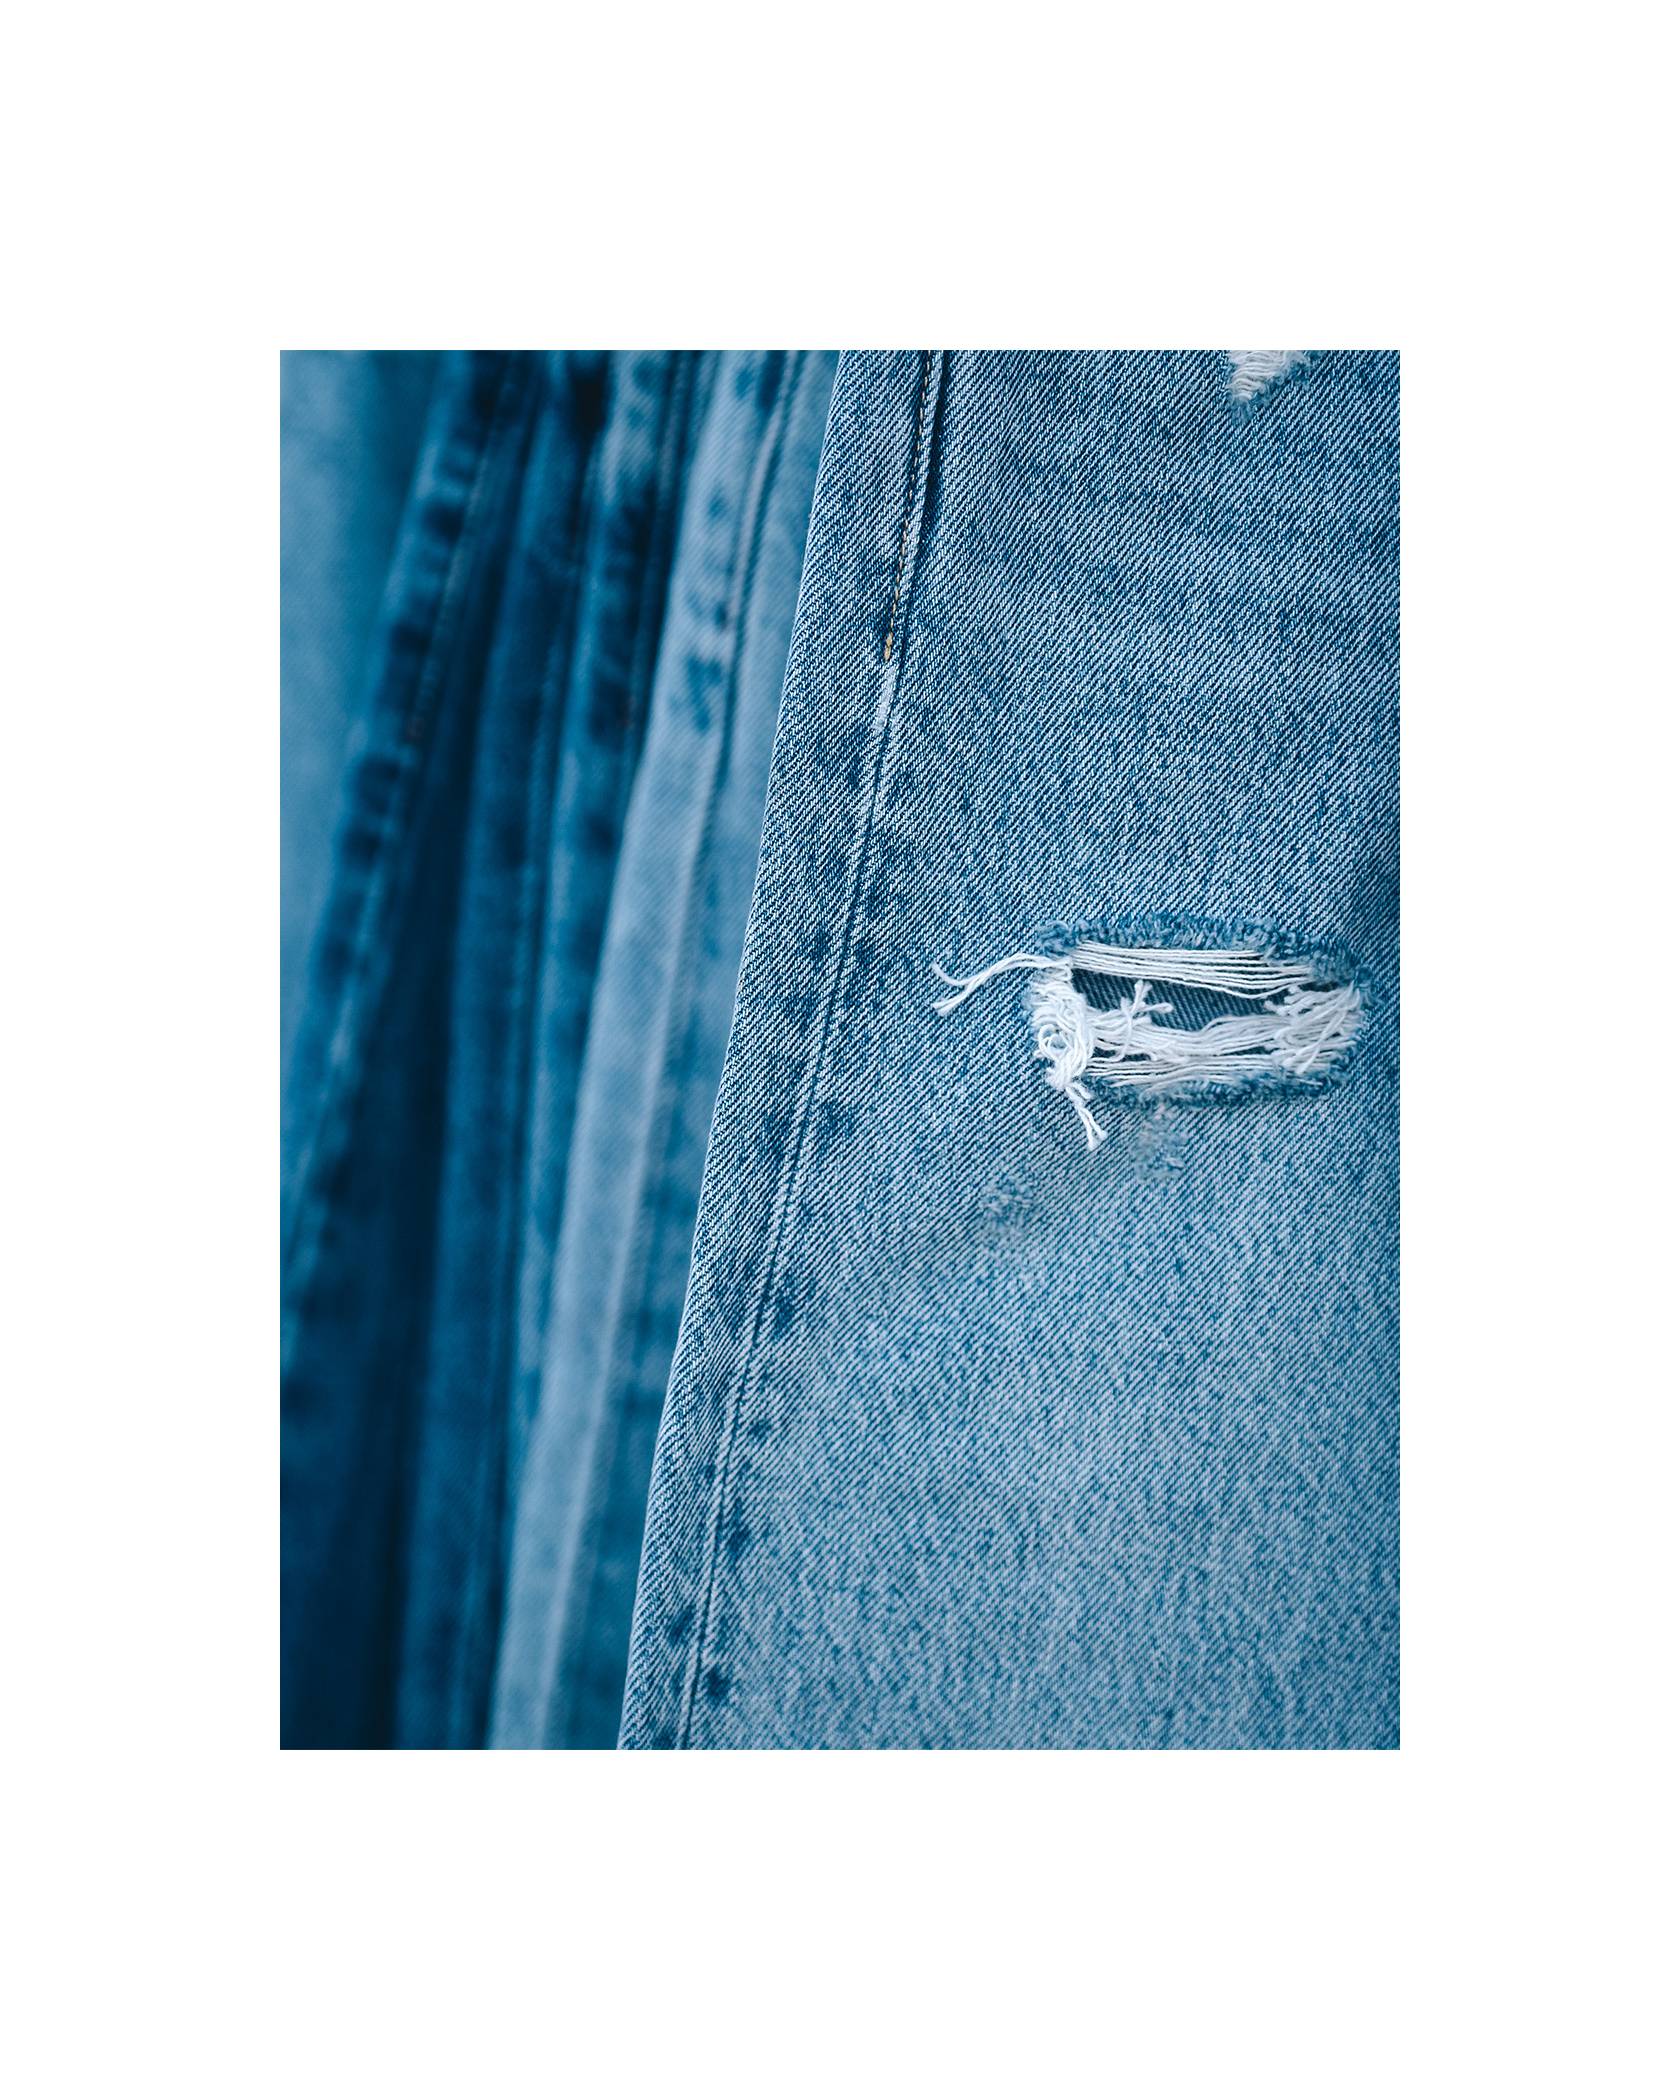 Imagery of a stack of blue denim jeans with a close-up shot of a rip on the pair of jeans closest to the camera.